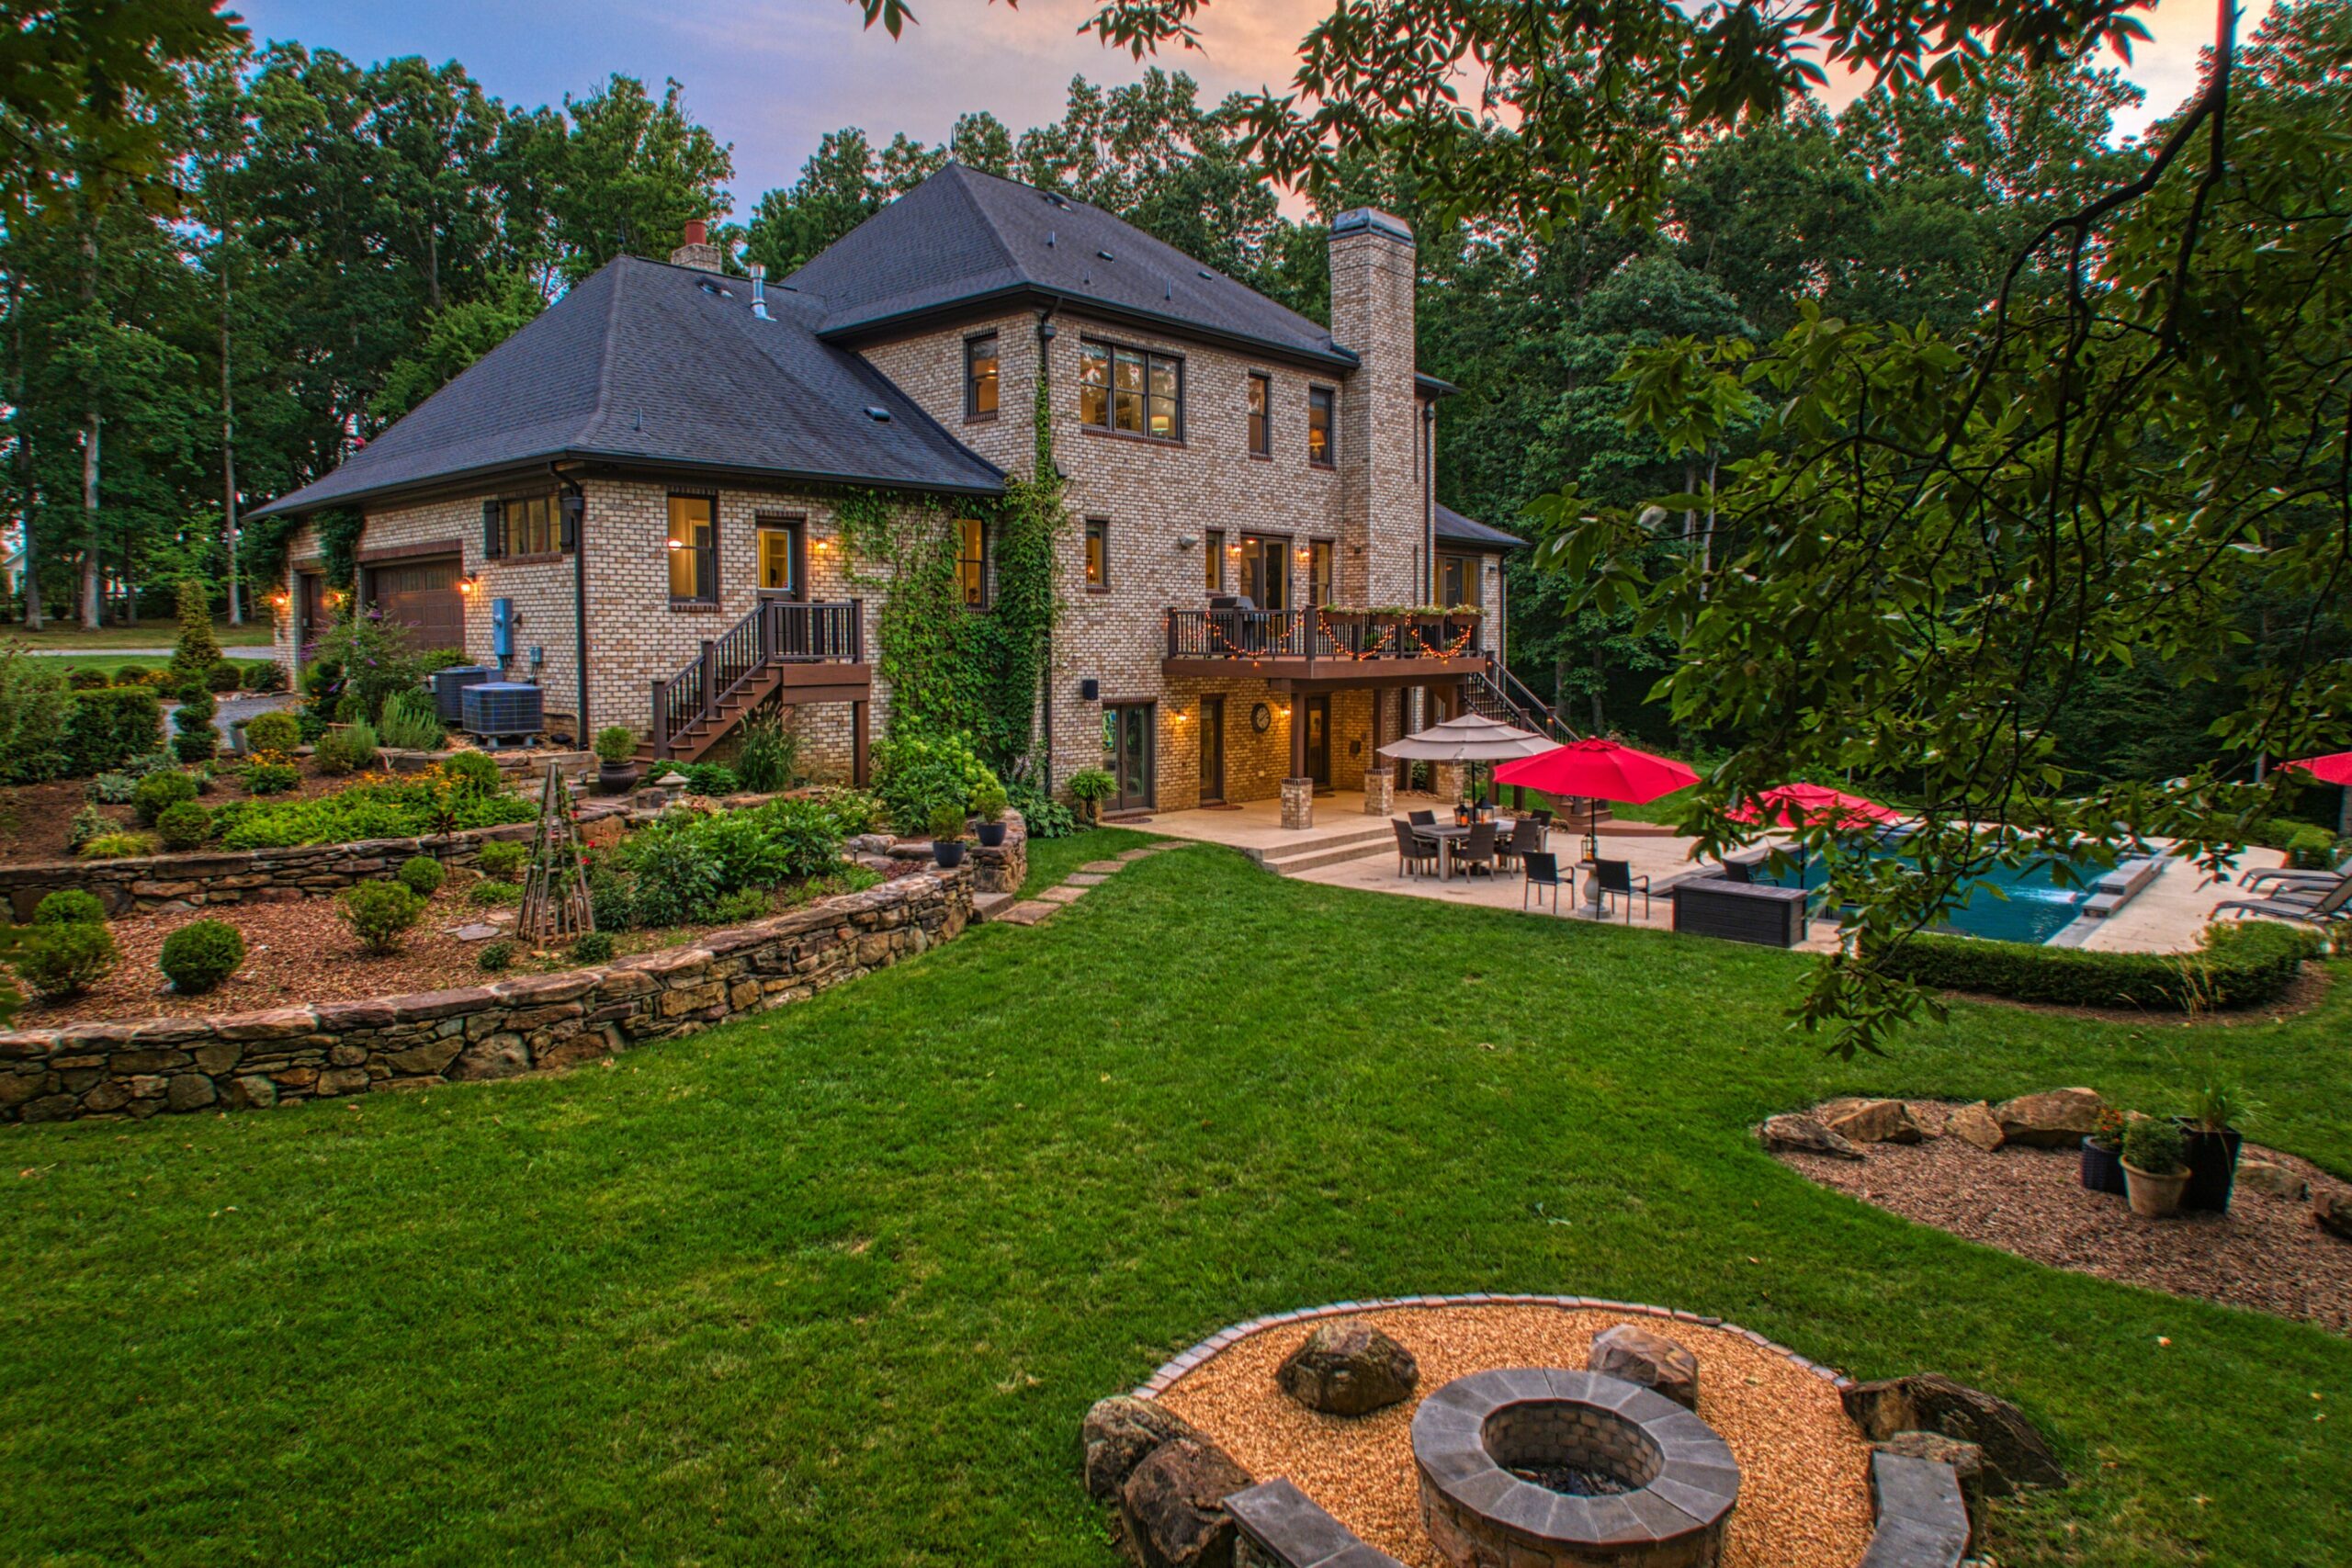 Professional exterior photo of 40046 Mount Gilead Rd in Leesburg, Virginia - showing the rear of the stone home with terraced landscaping, a fire pit, and looking back towards the house there is a deck, terrace and inground pool